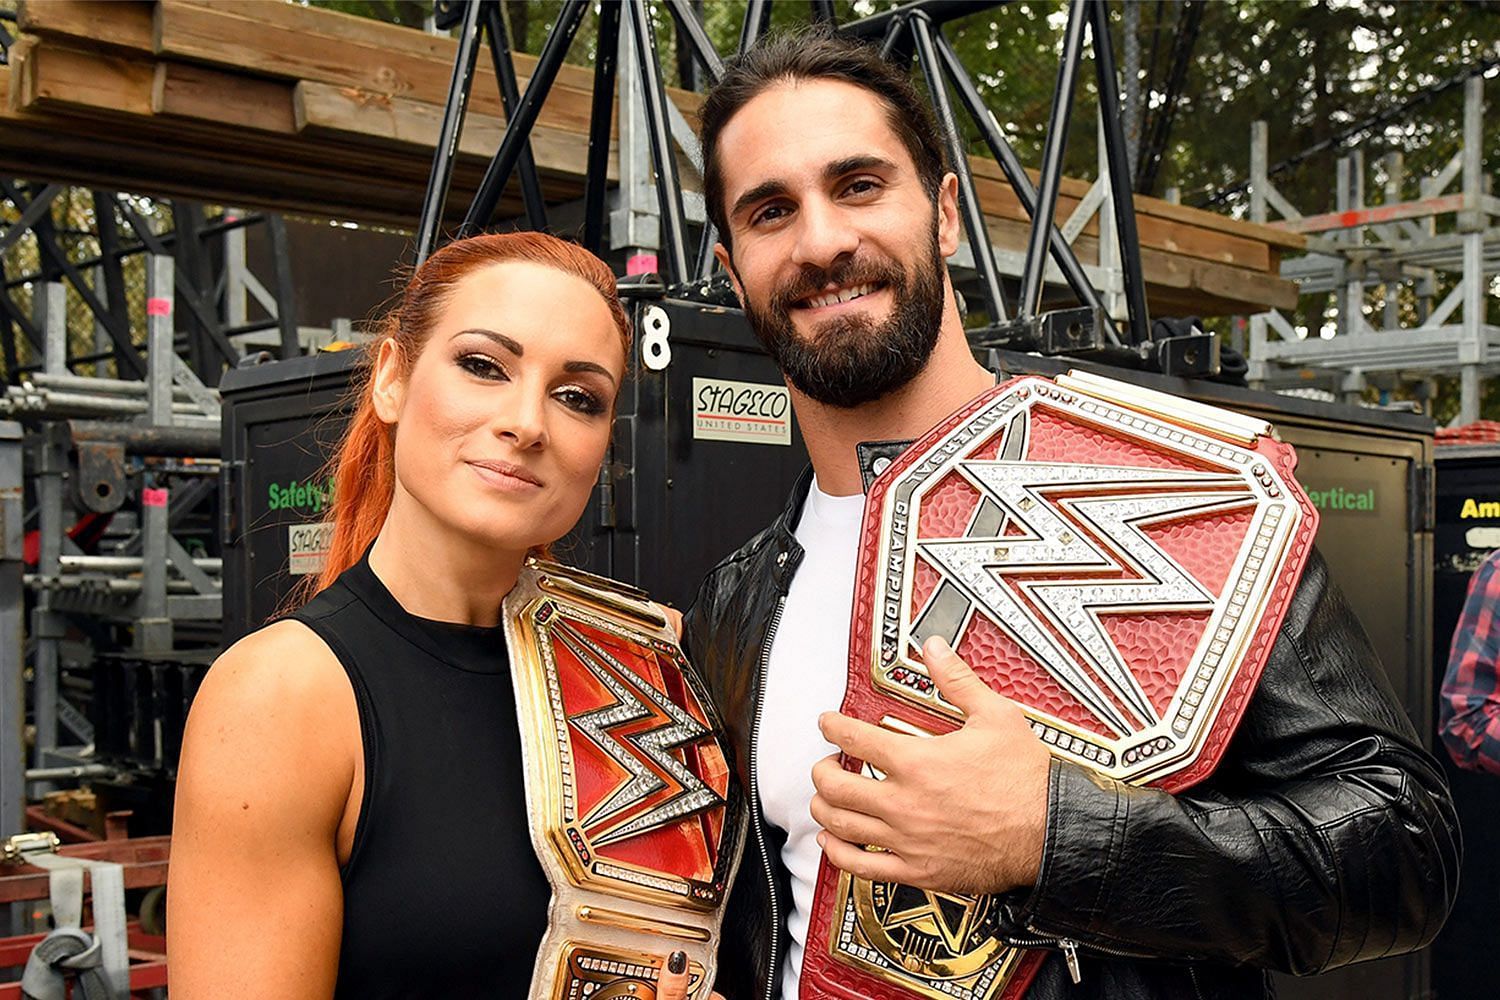 Becky Lynch and Seth Rollins holding their respective titles in 2019.